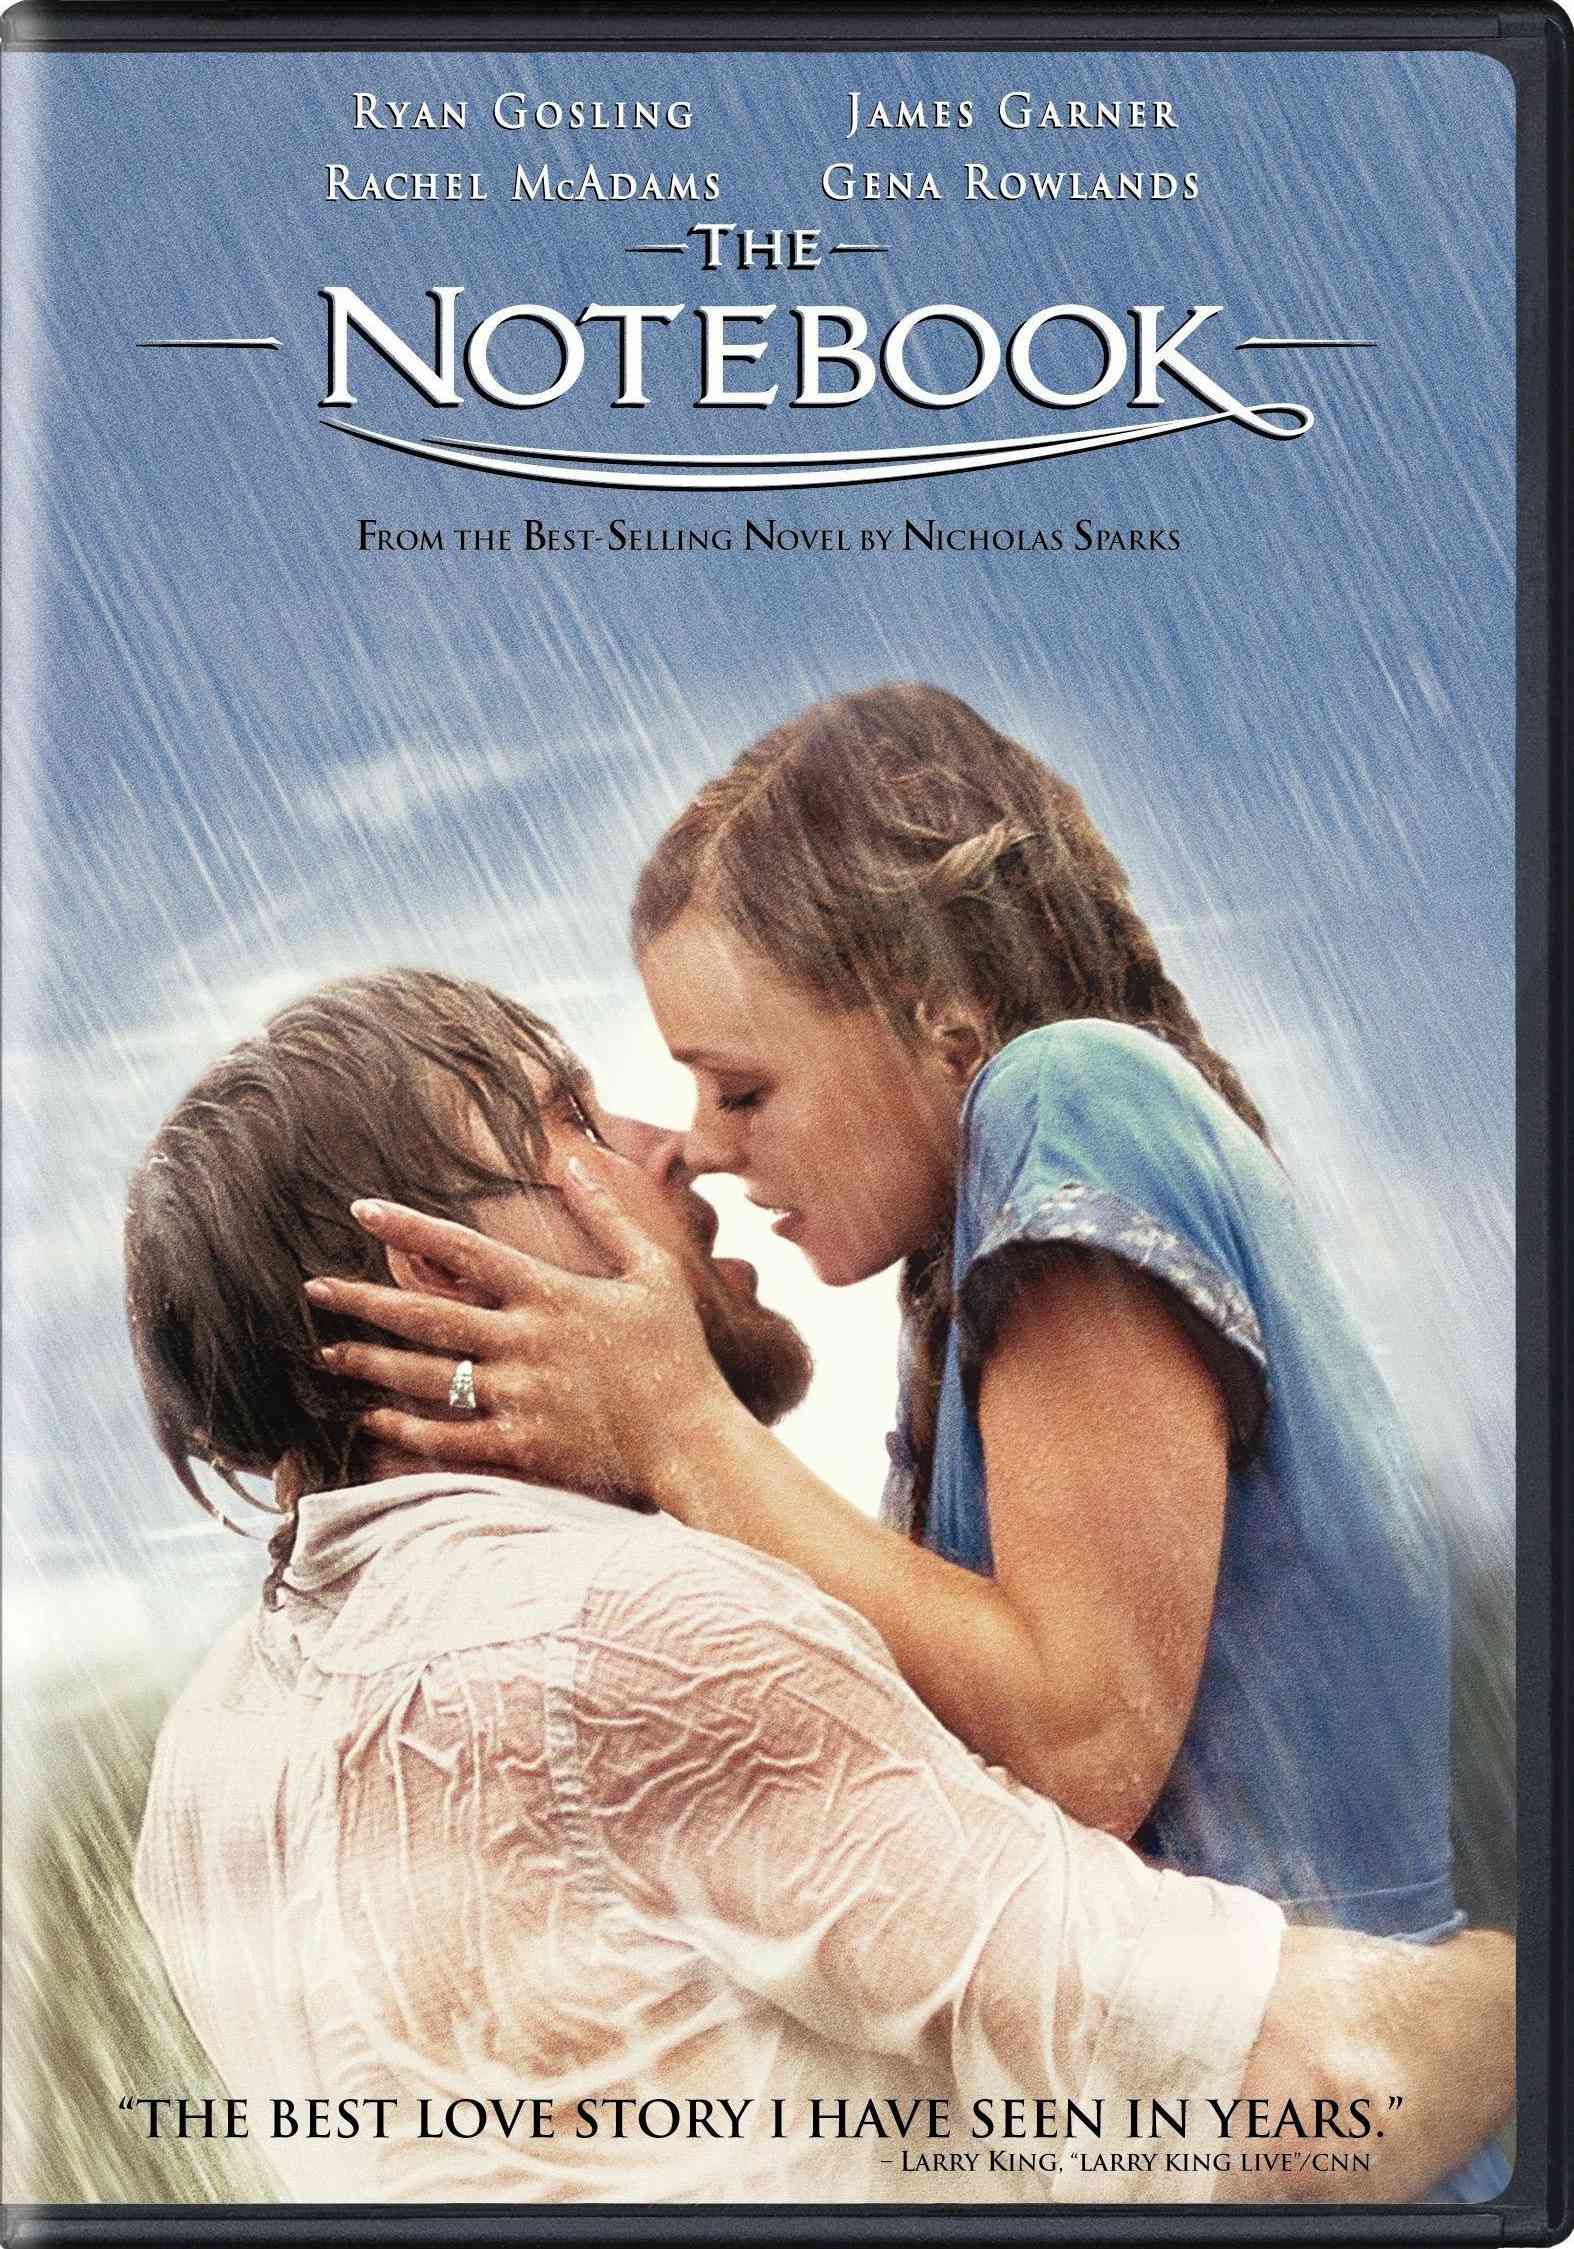 FULL MOVIE: The Notebook (2004)